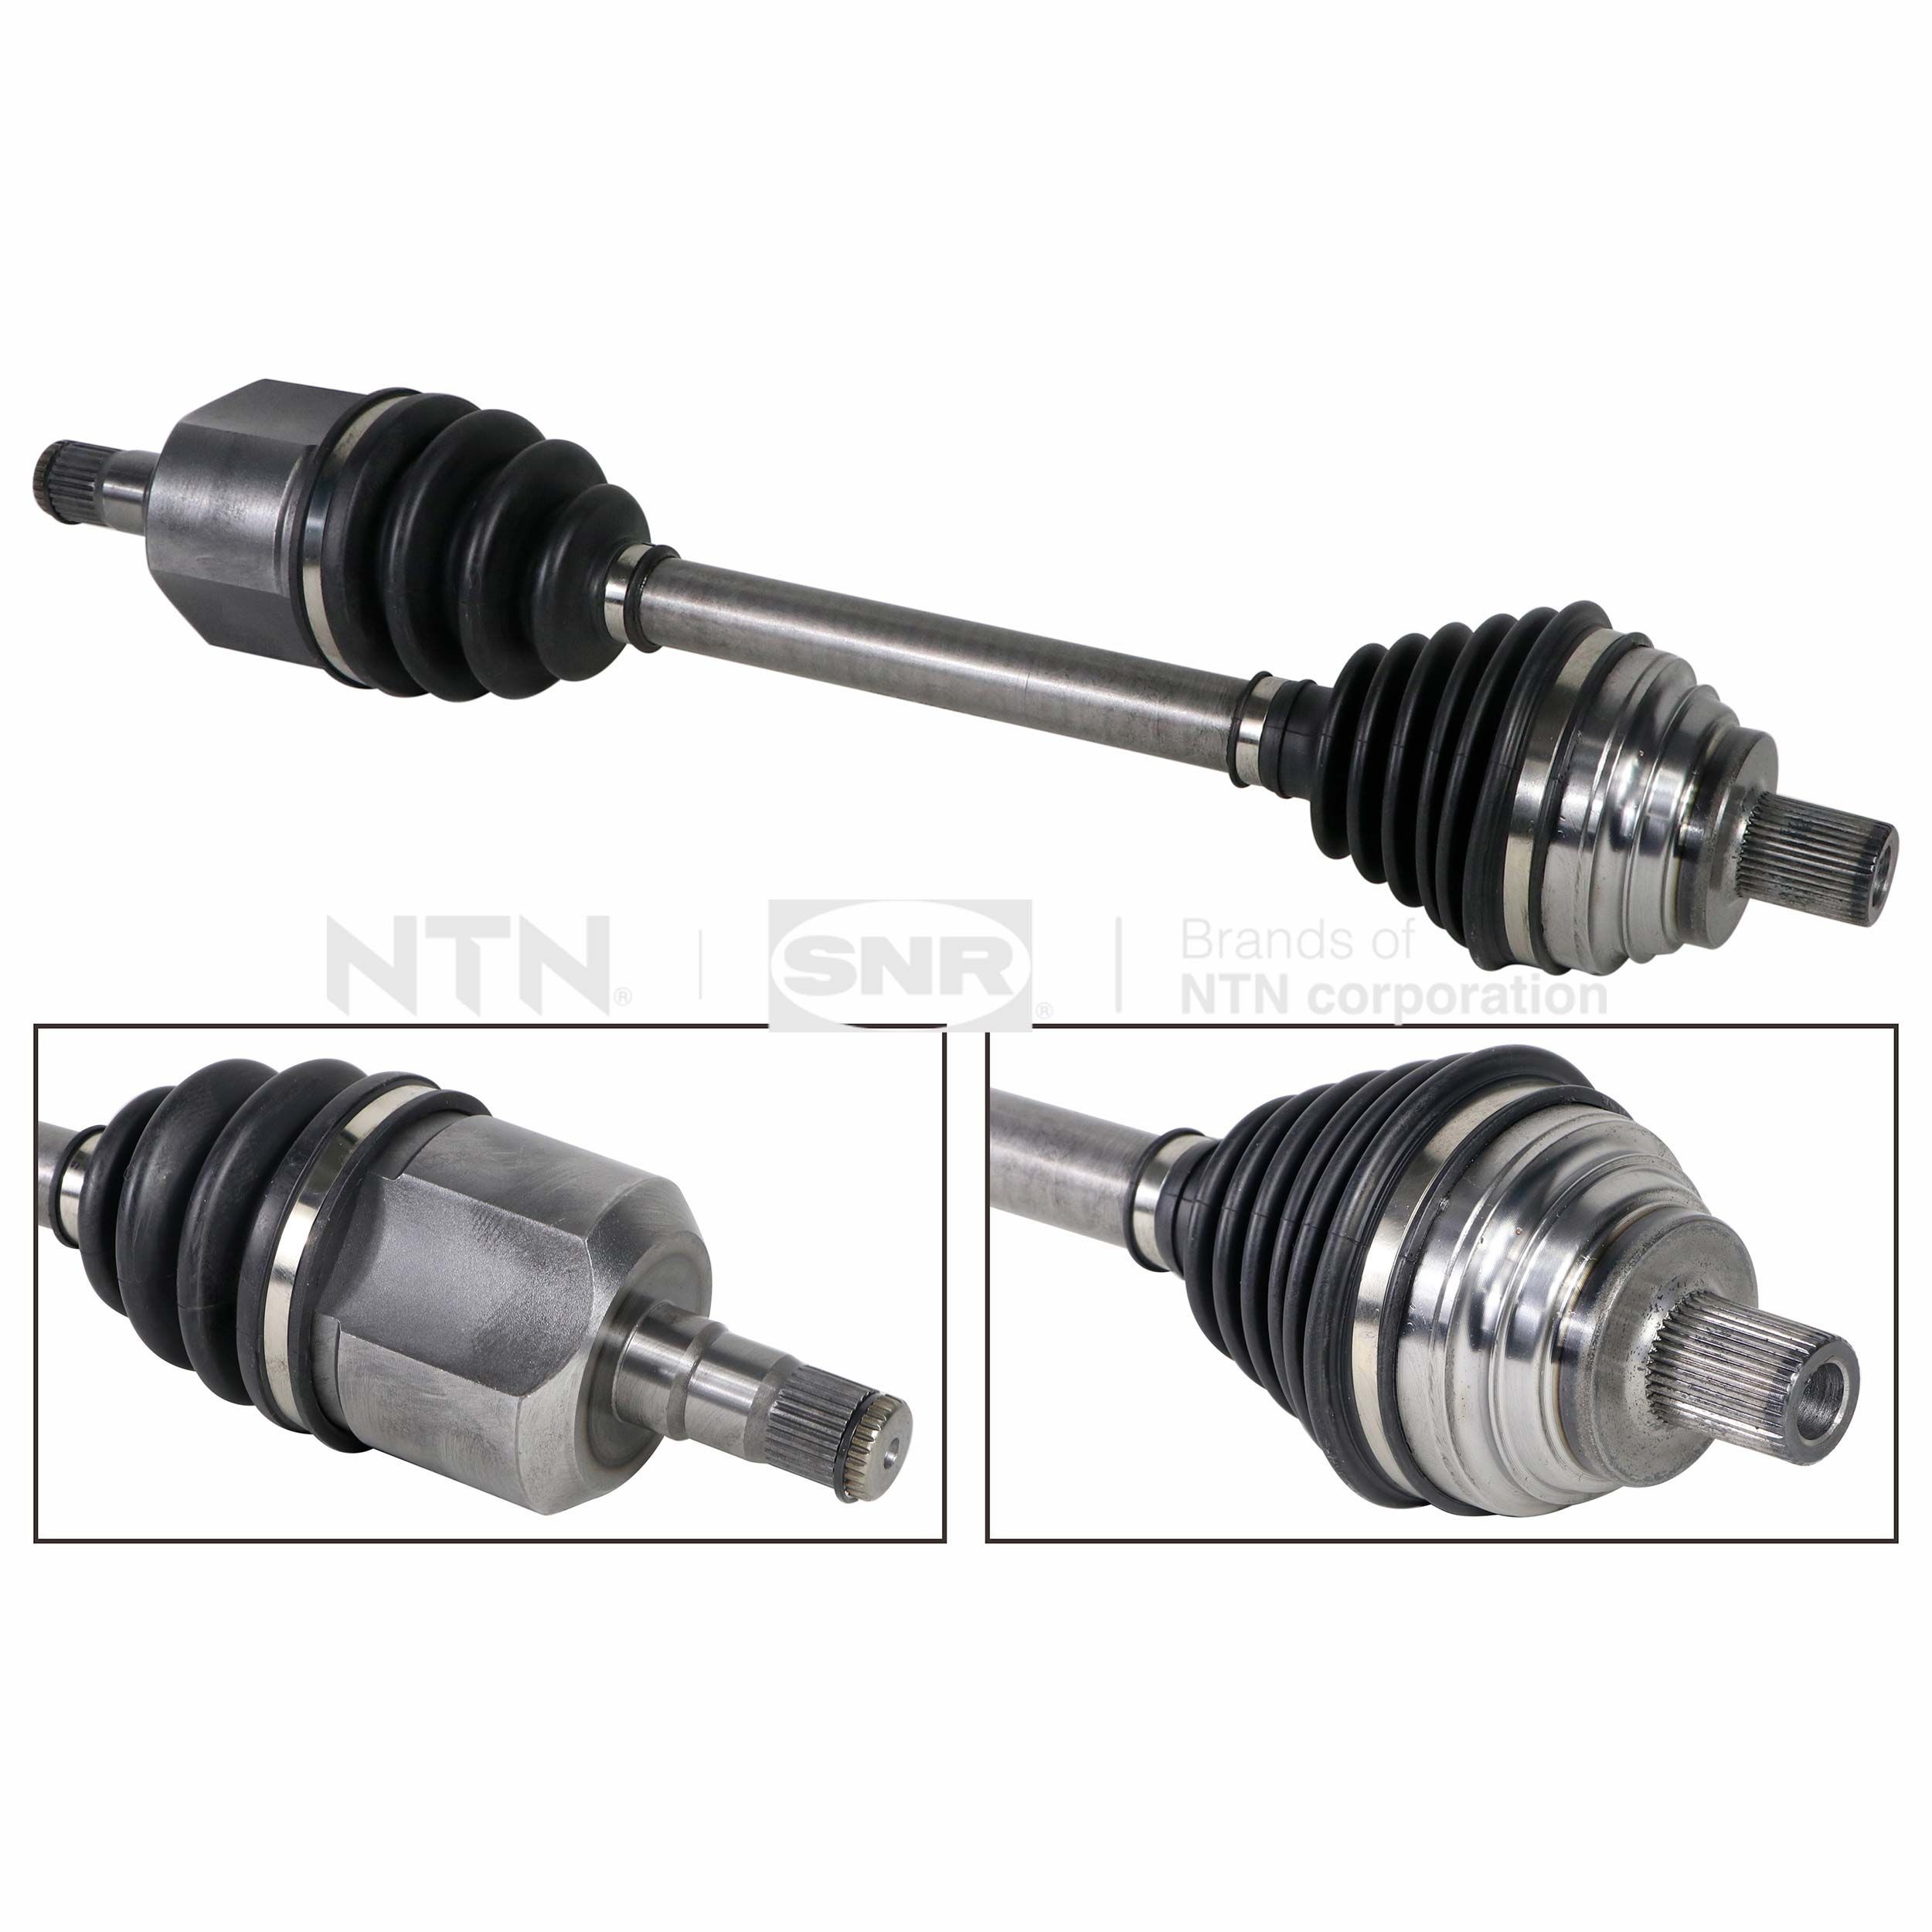 SNR Front Axle Left, 581mm Length: 581mm, External Toothing wheel side: 36 Driveshaft DK54.055 buy